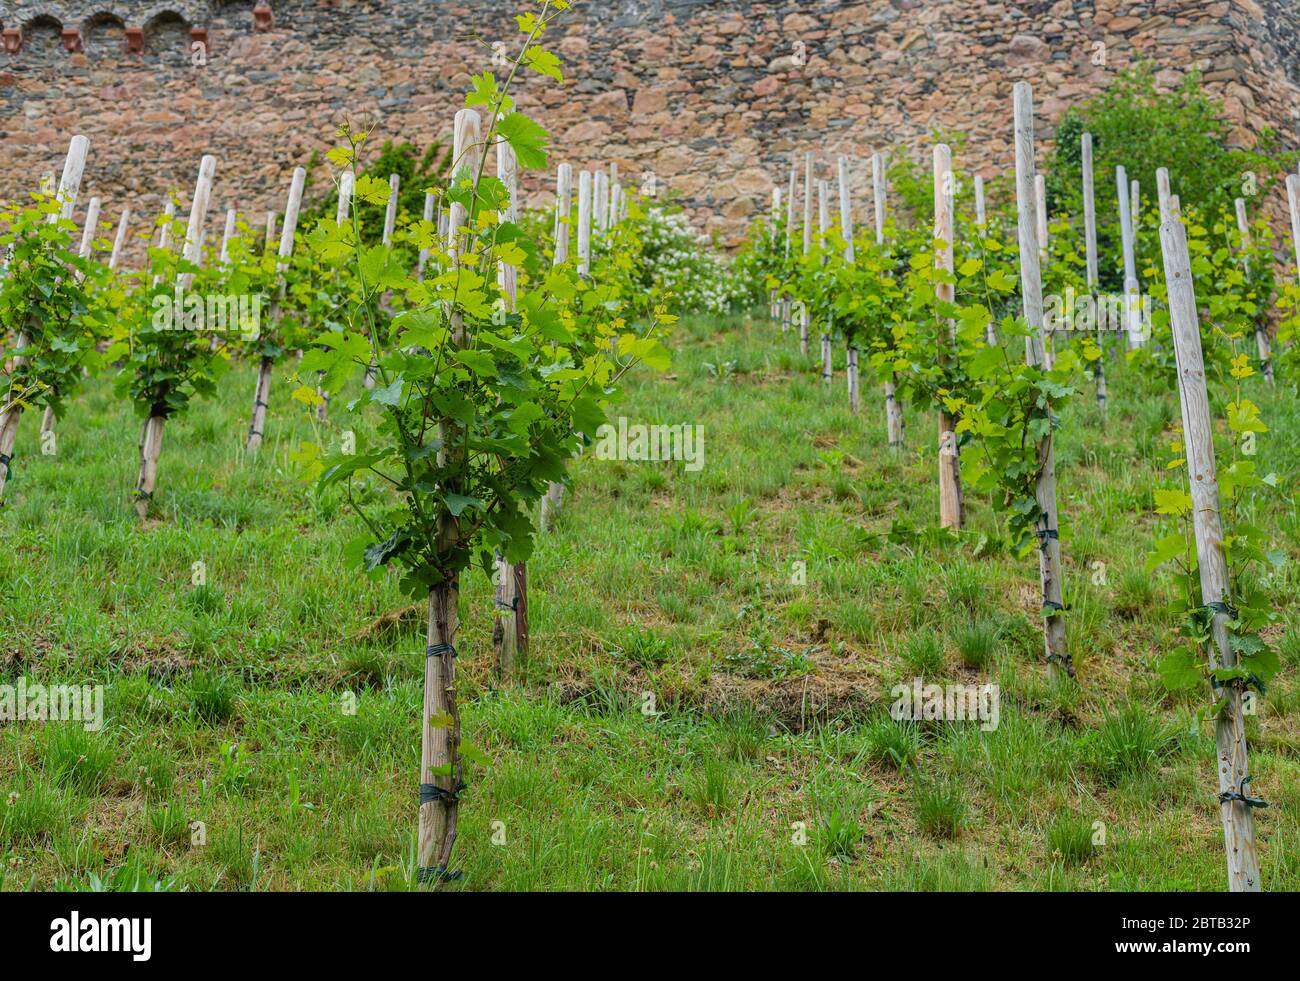 A small vineyard on the hillside below the castle. Young grape bushes. Wine production. South Germany. Young shoots and leaves. Stock Photo